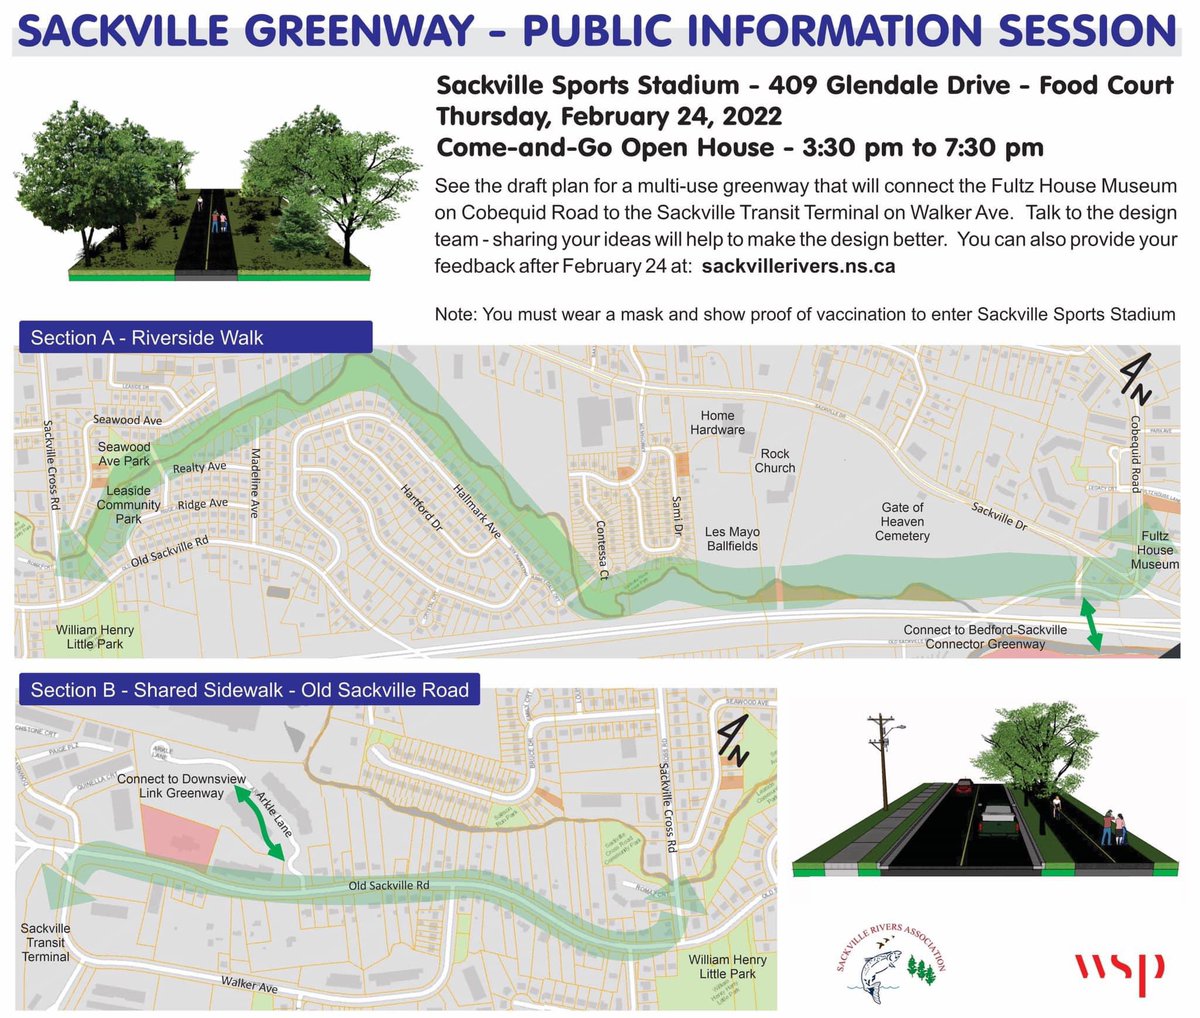 TODAY - come see, and help shape future plans for #Halifax's multi-use #BedfordSackvilleGreenway Trail at the #Sackville Sports Stadium food court from 3:30-7:30pm. 